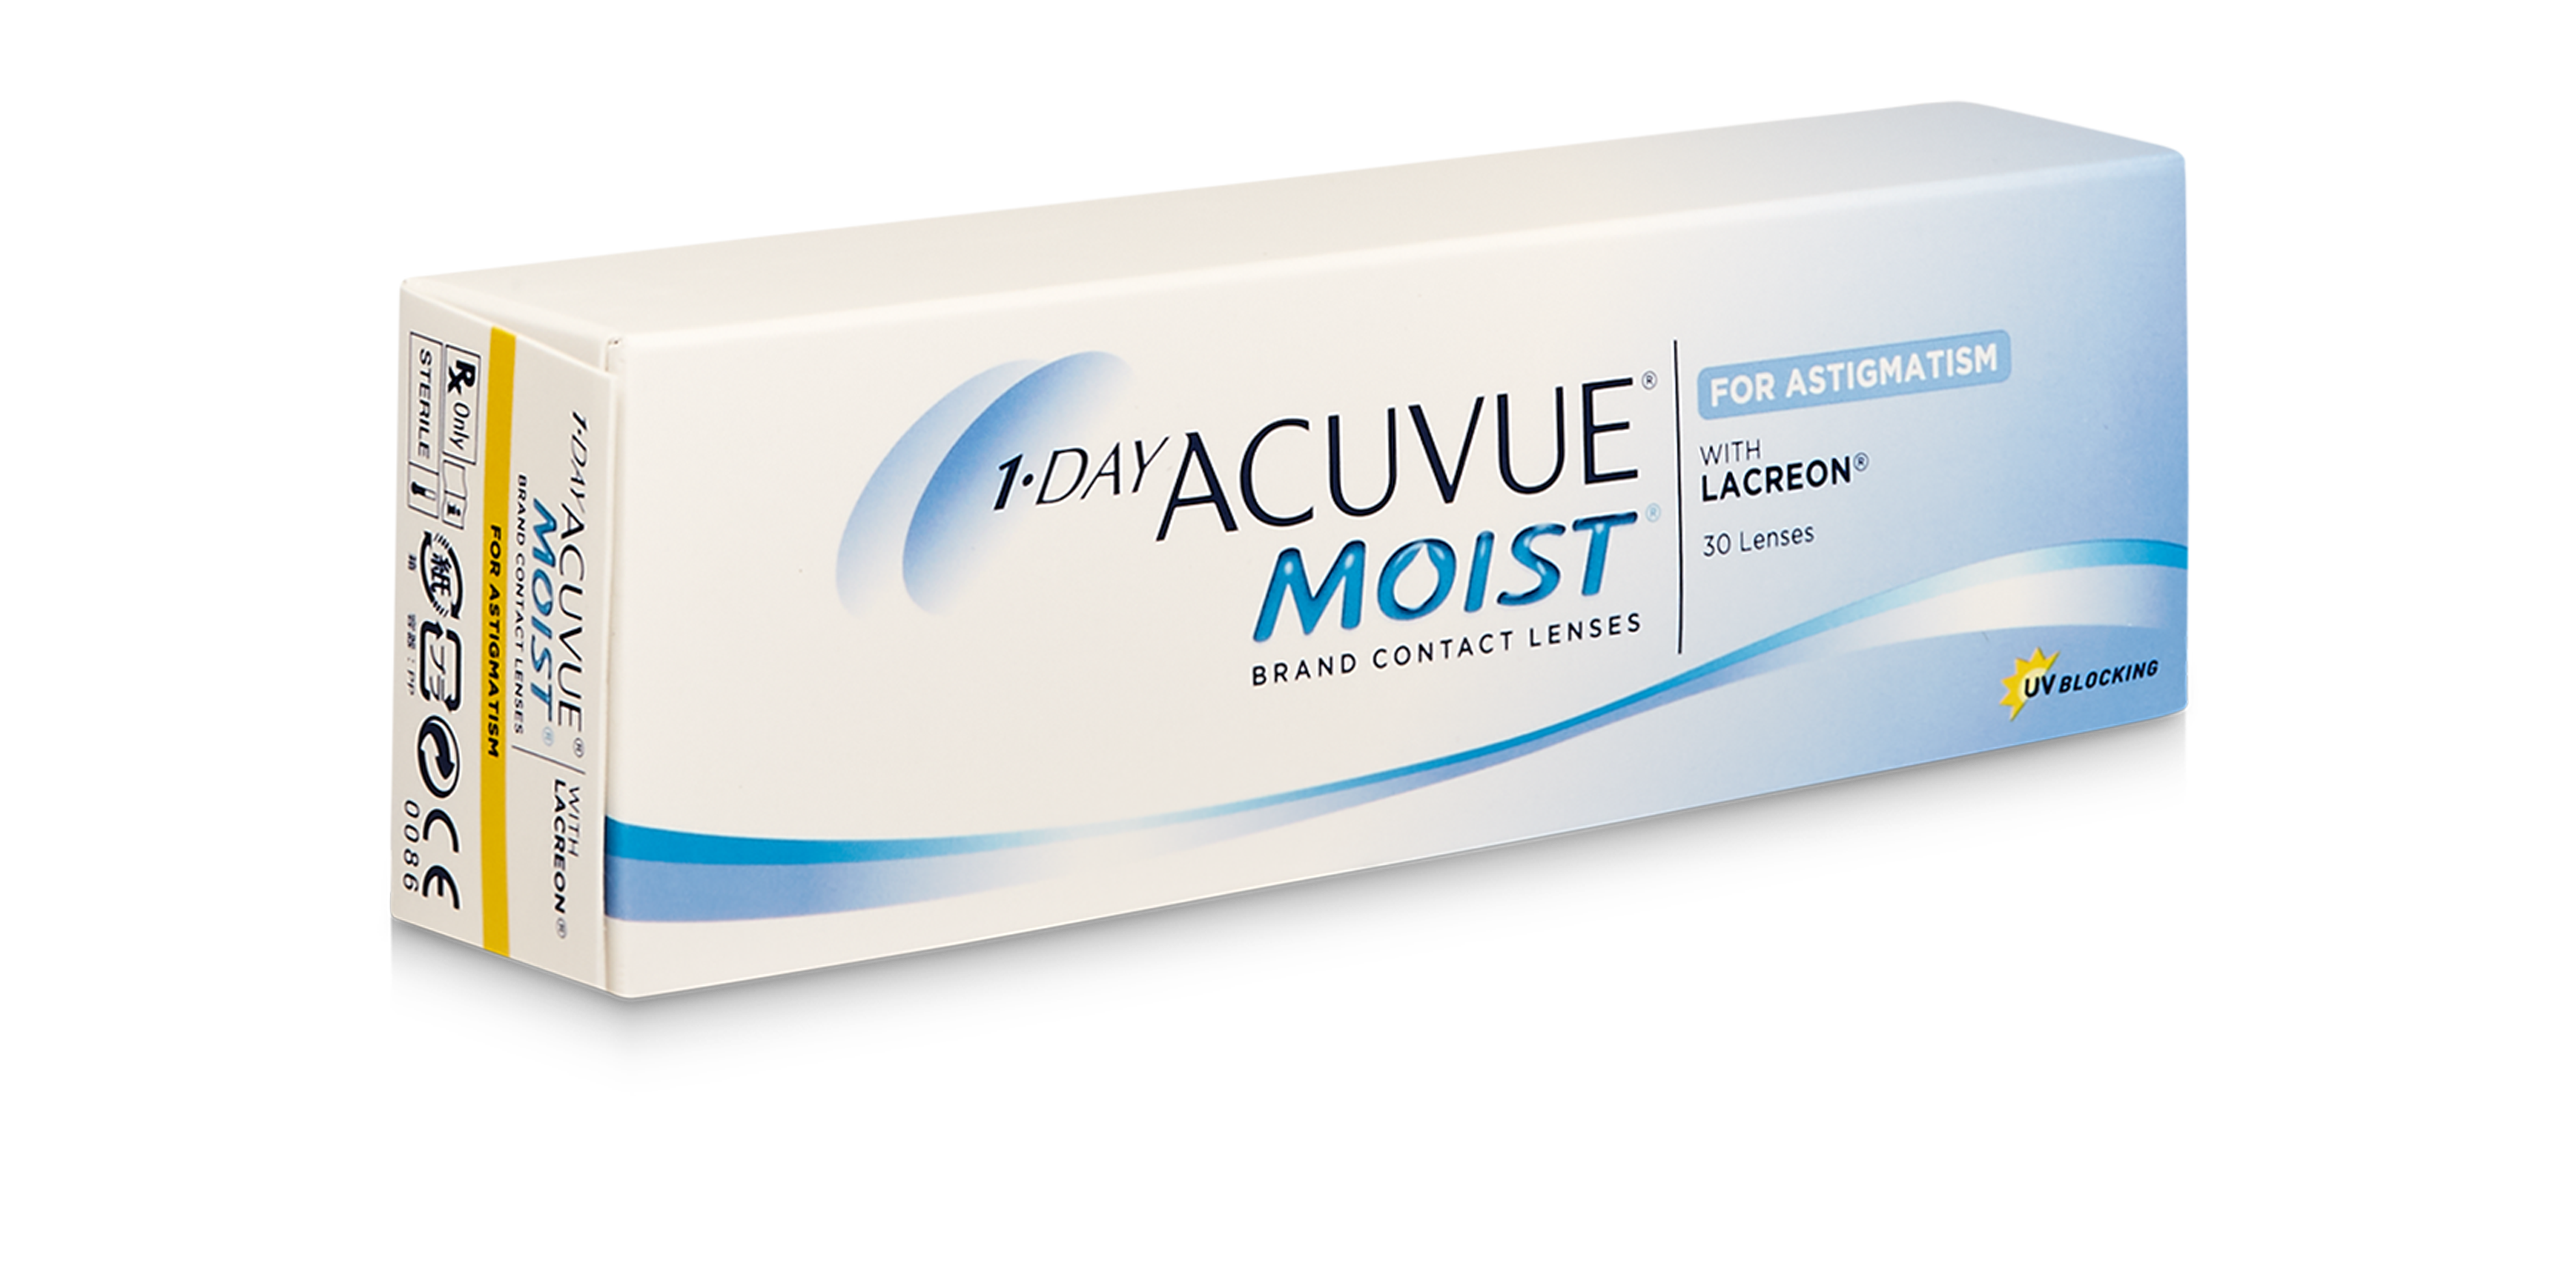 1-DAY ACUVUE® MOIST for ASTIGMATISM, 30 pack